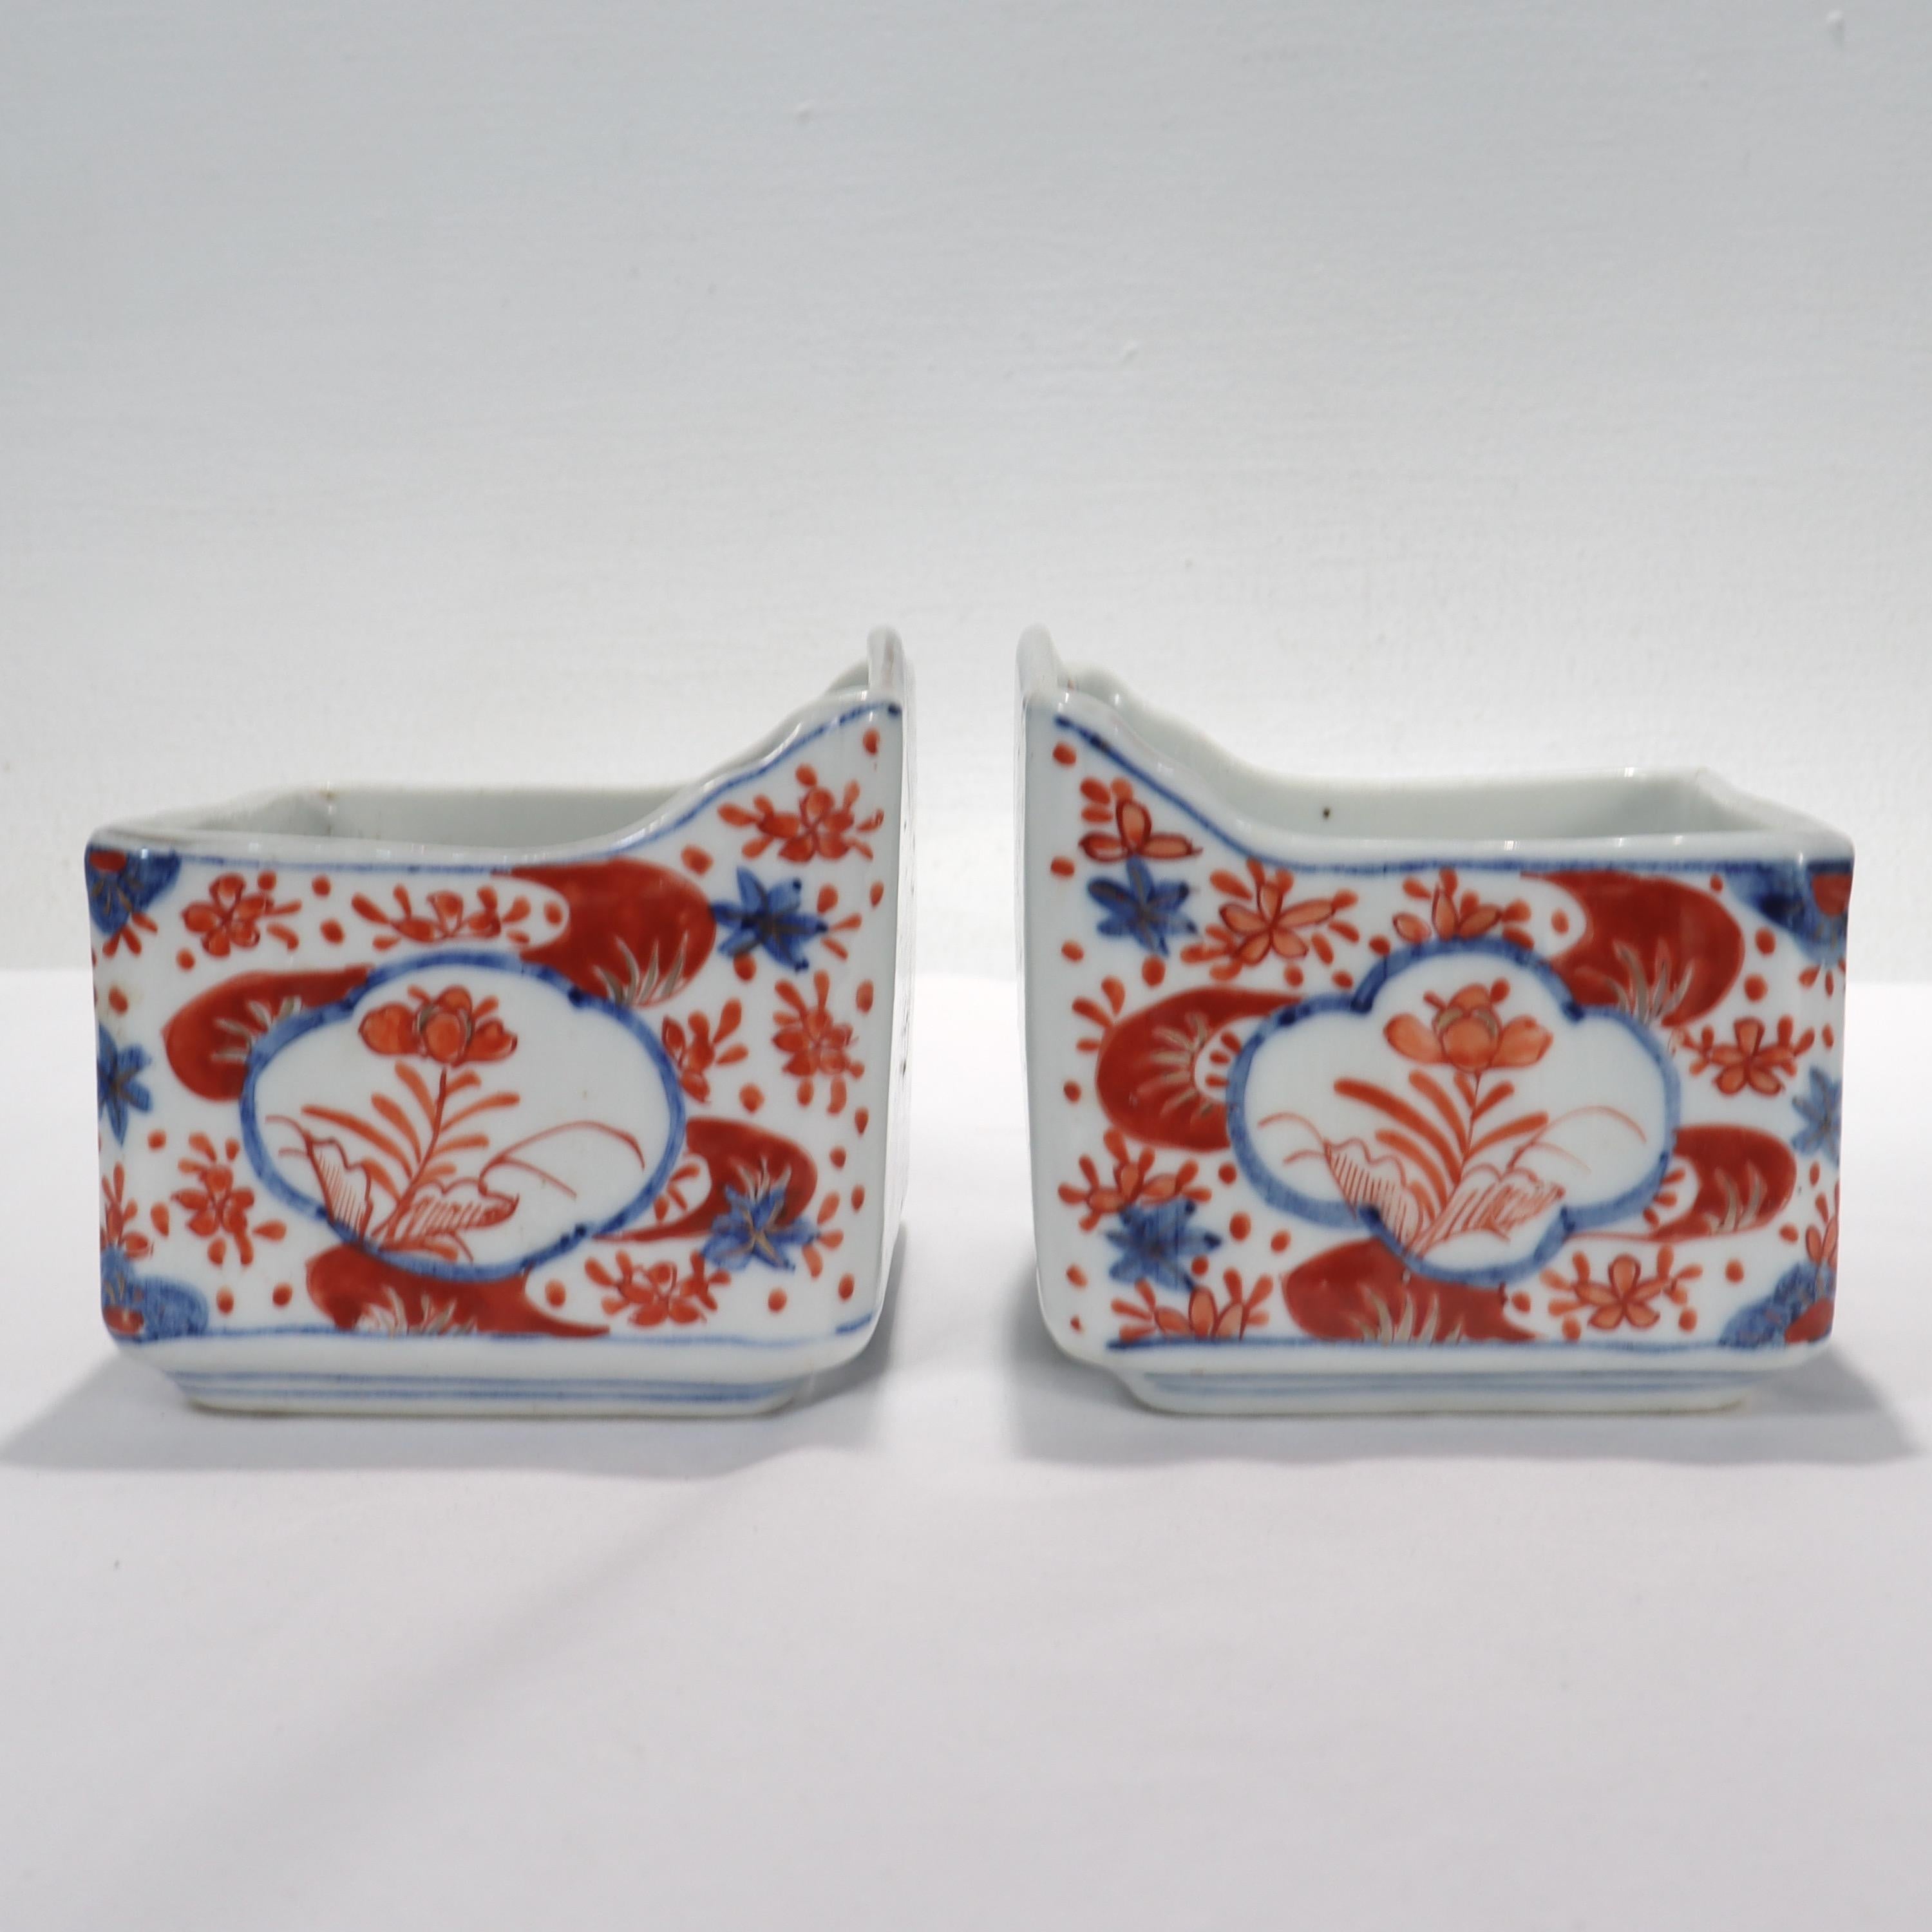 20th Century Pair of Old or Antique Japanese Imari Porcelain Soap Dishes For Sale